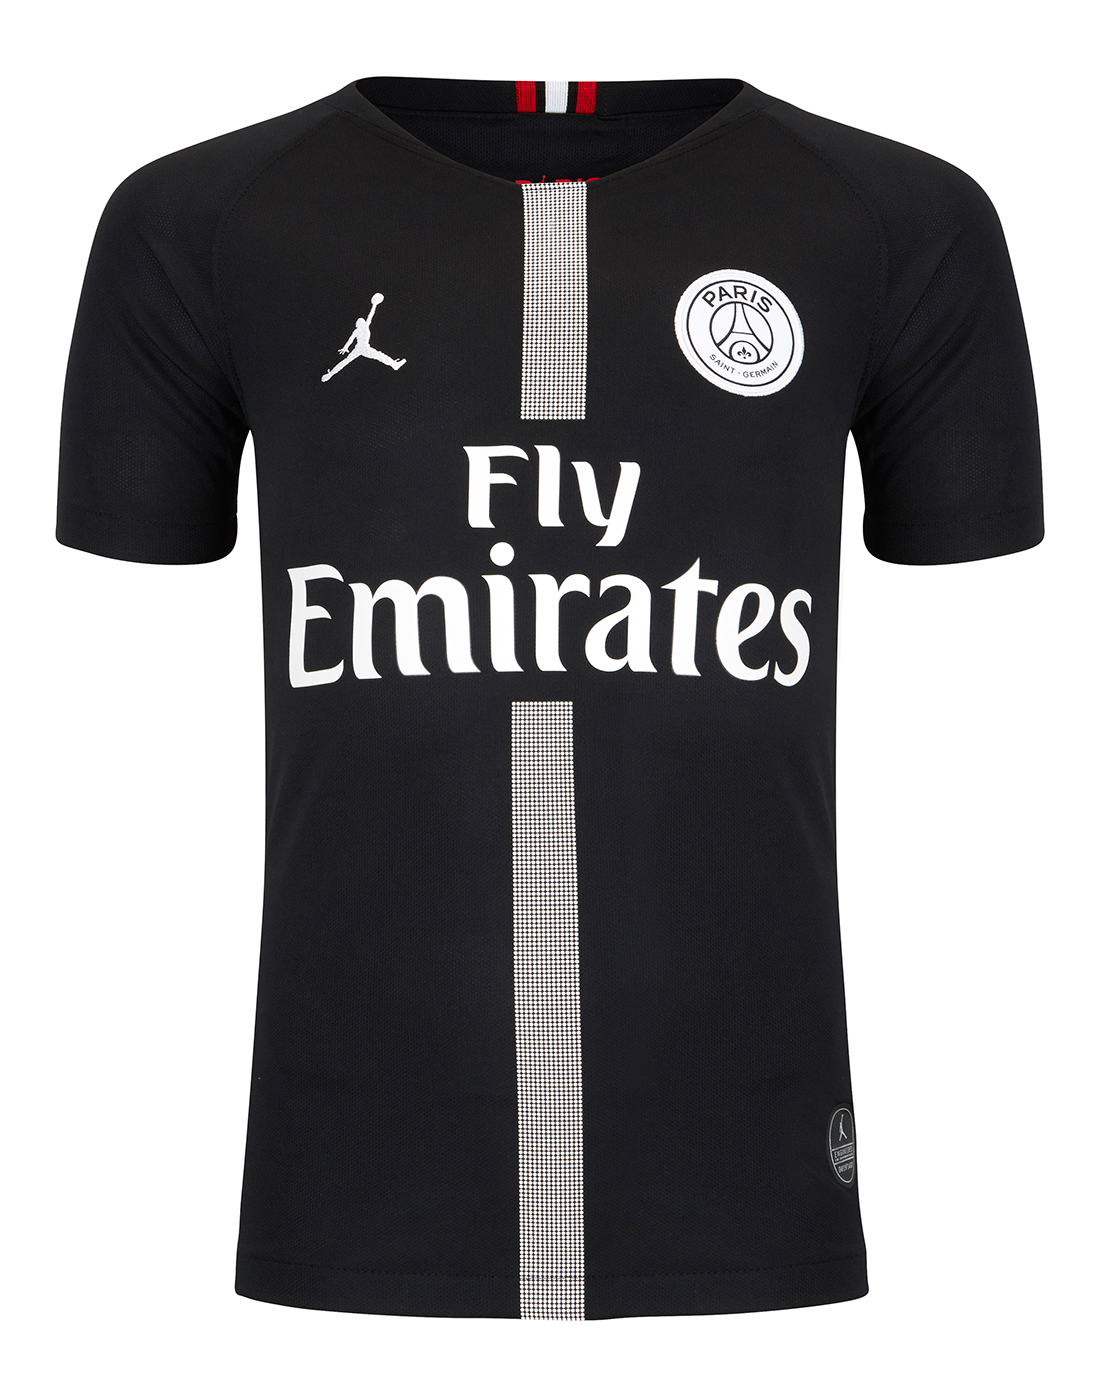 black and white fly emirates jersey